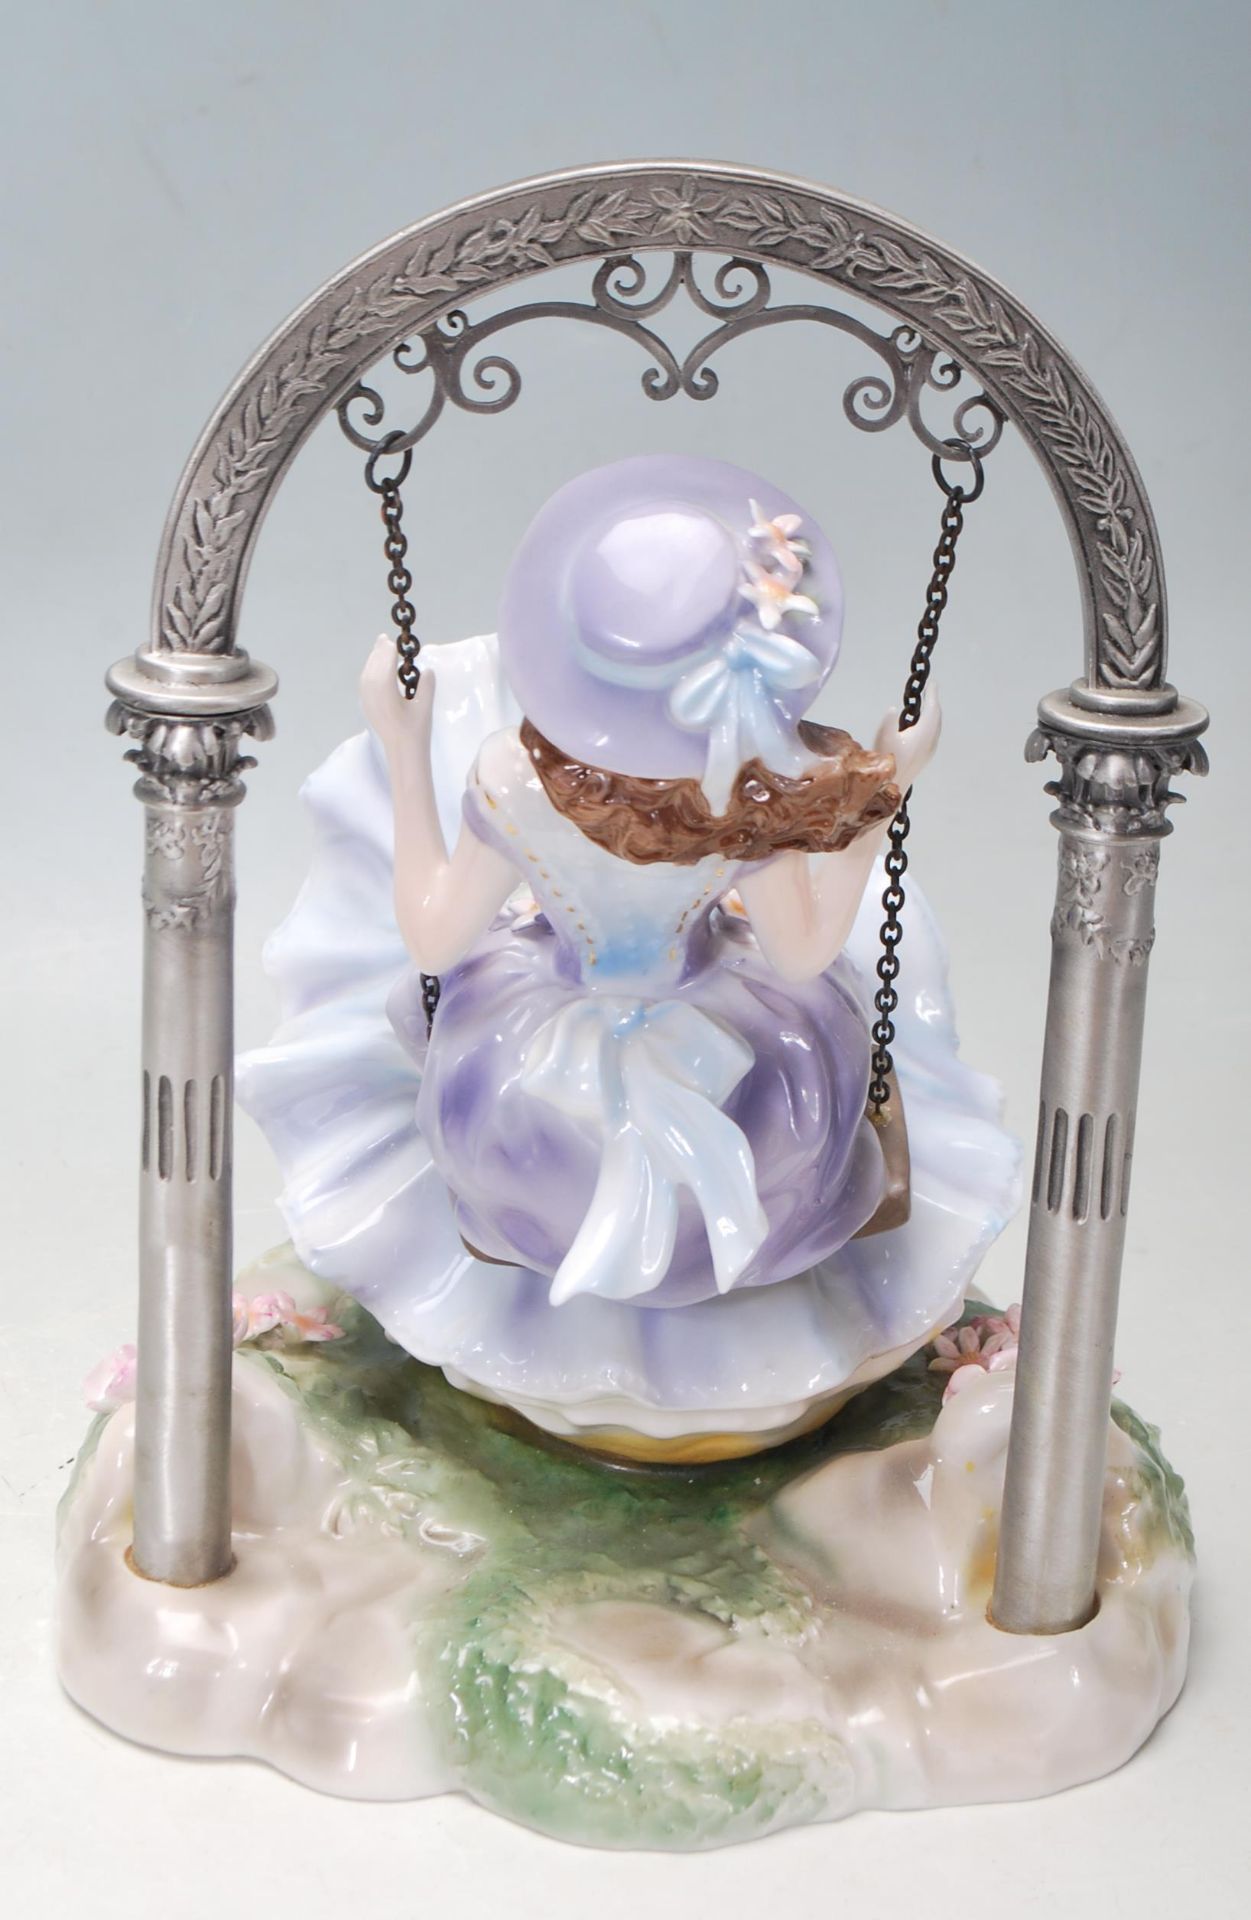 20TH CENTURY ROYAL WORCESTER LIMITED EDITION 50/250 CERAMIC FIGURINE - THE SWING - CW519 - Image 4 of 6